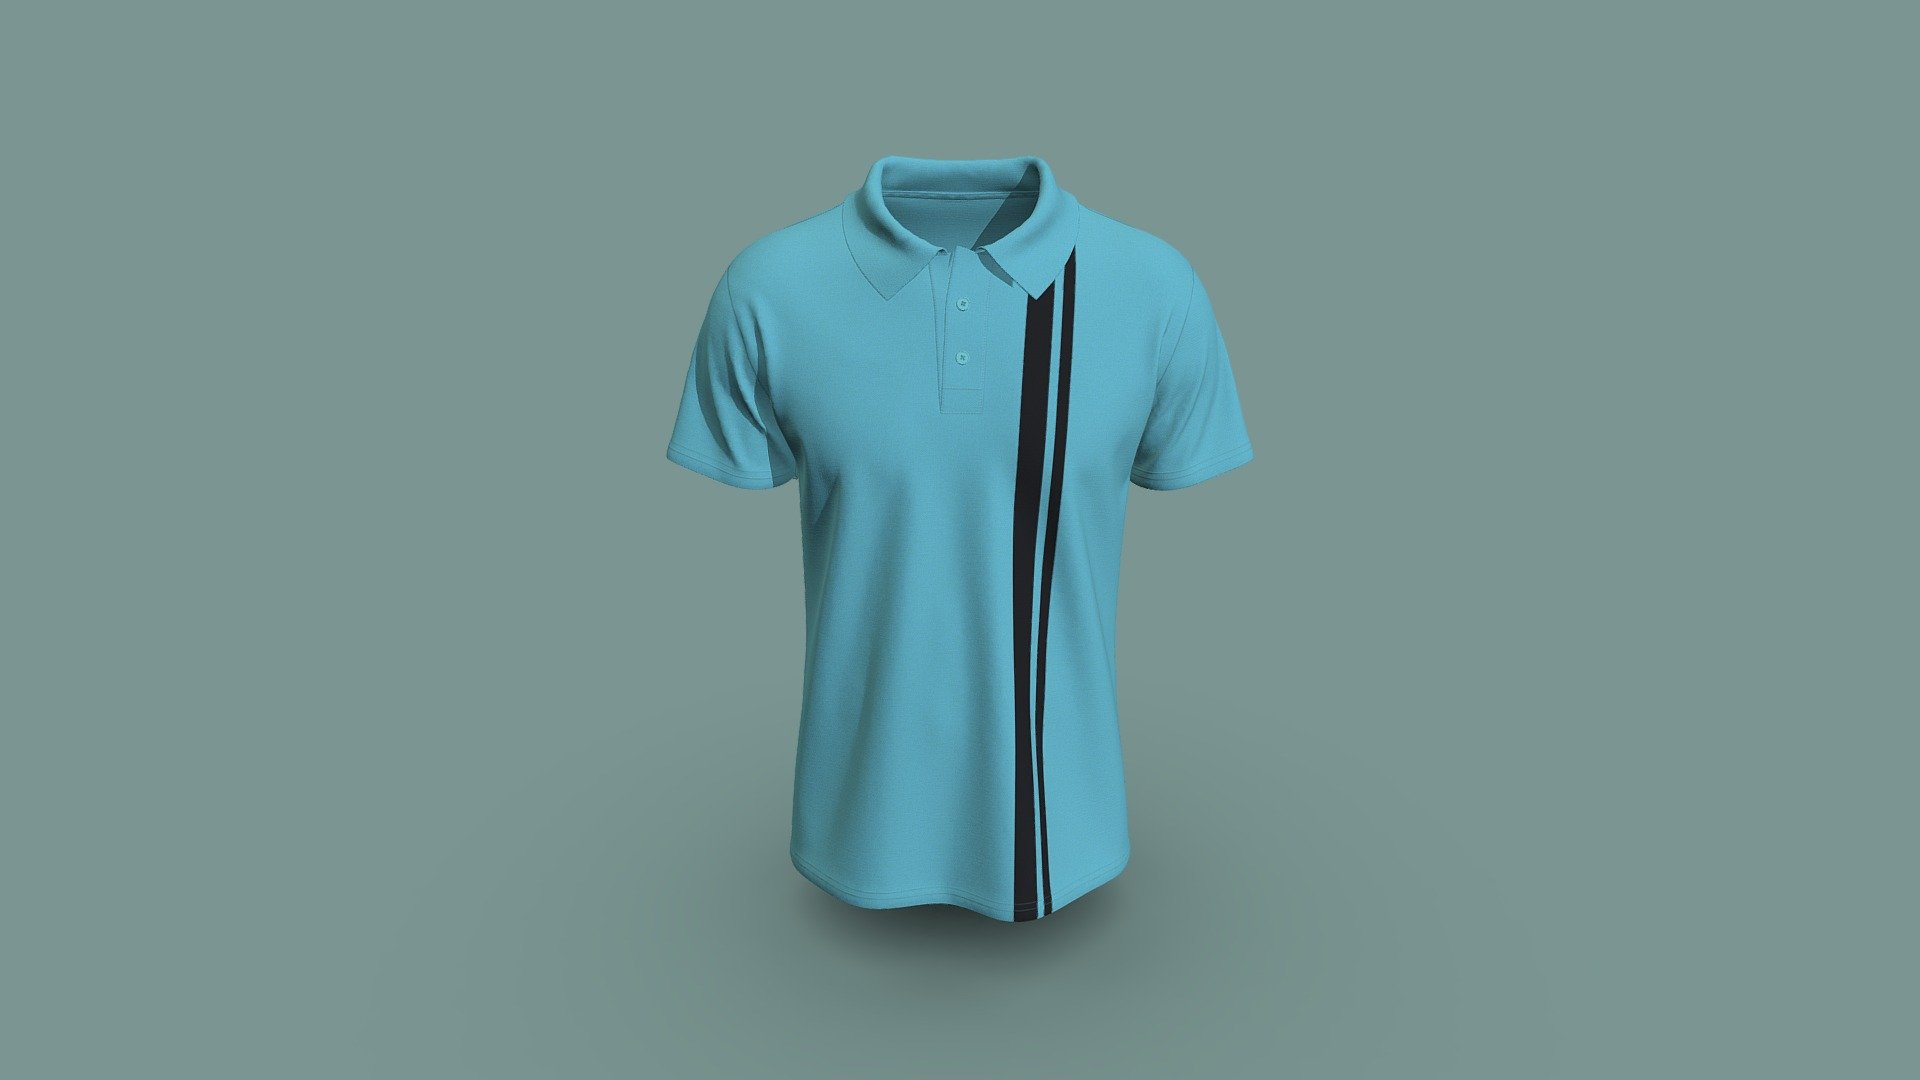 Cloth Title = Polo 3D Design 

SKU = DG100201 

Category = Men 

Product Type = Polo 

Cloth Length = Regular 

Body Fit = Regular Fit 

Occasion = Casual  

Sleeve Style = Short Sleeve 


Our Services:

3D Apparel Design.

OBJ,FBX,GLTF Making with High/Low Poly.

Fabric Digitalization.

Mockup making.

3D Teck Pack.

Pattern Making.

2D Illustration.

Cloth Animation and 360 Spin Video.


Contact us:- 

Email: info@digitalfashionwear.com 

Website: https://digitalfashionwear.com 


We designed all the types of cloth specially focused on product visualization, e-commerce, fitting, and production. 

We will design: 

T-shirts 

Polo shirts 

Hoodies 

Sweatshirt 

Jackets 

Shirts 

TankTops 

Trousers 

Bras 

Underwear 

Blazer 

Aprons 

Leggings 

and All Fashion items. 





Our goal is to make sure what we provide you, meets your demand 3d model